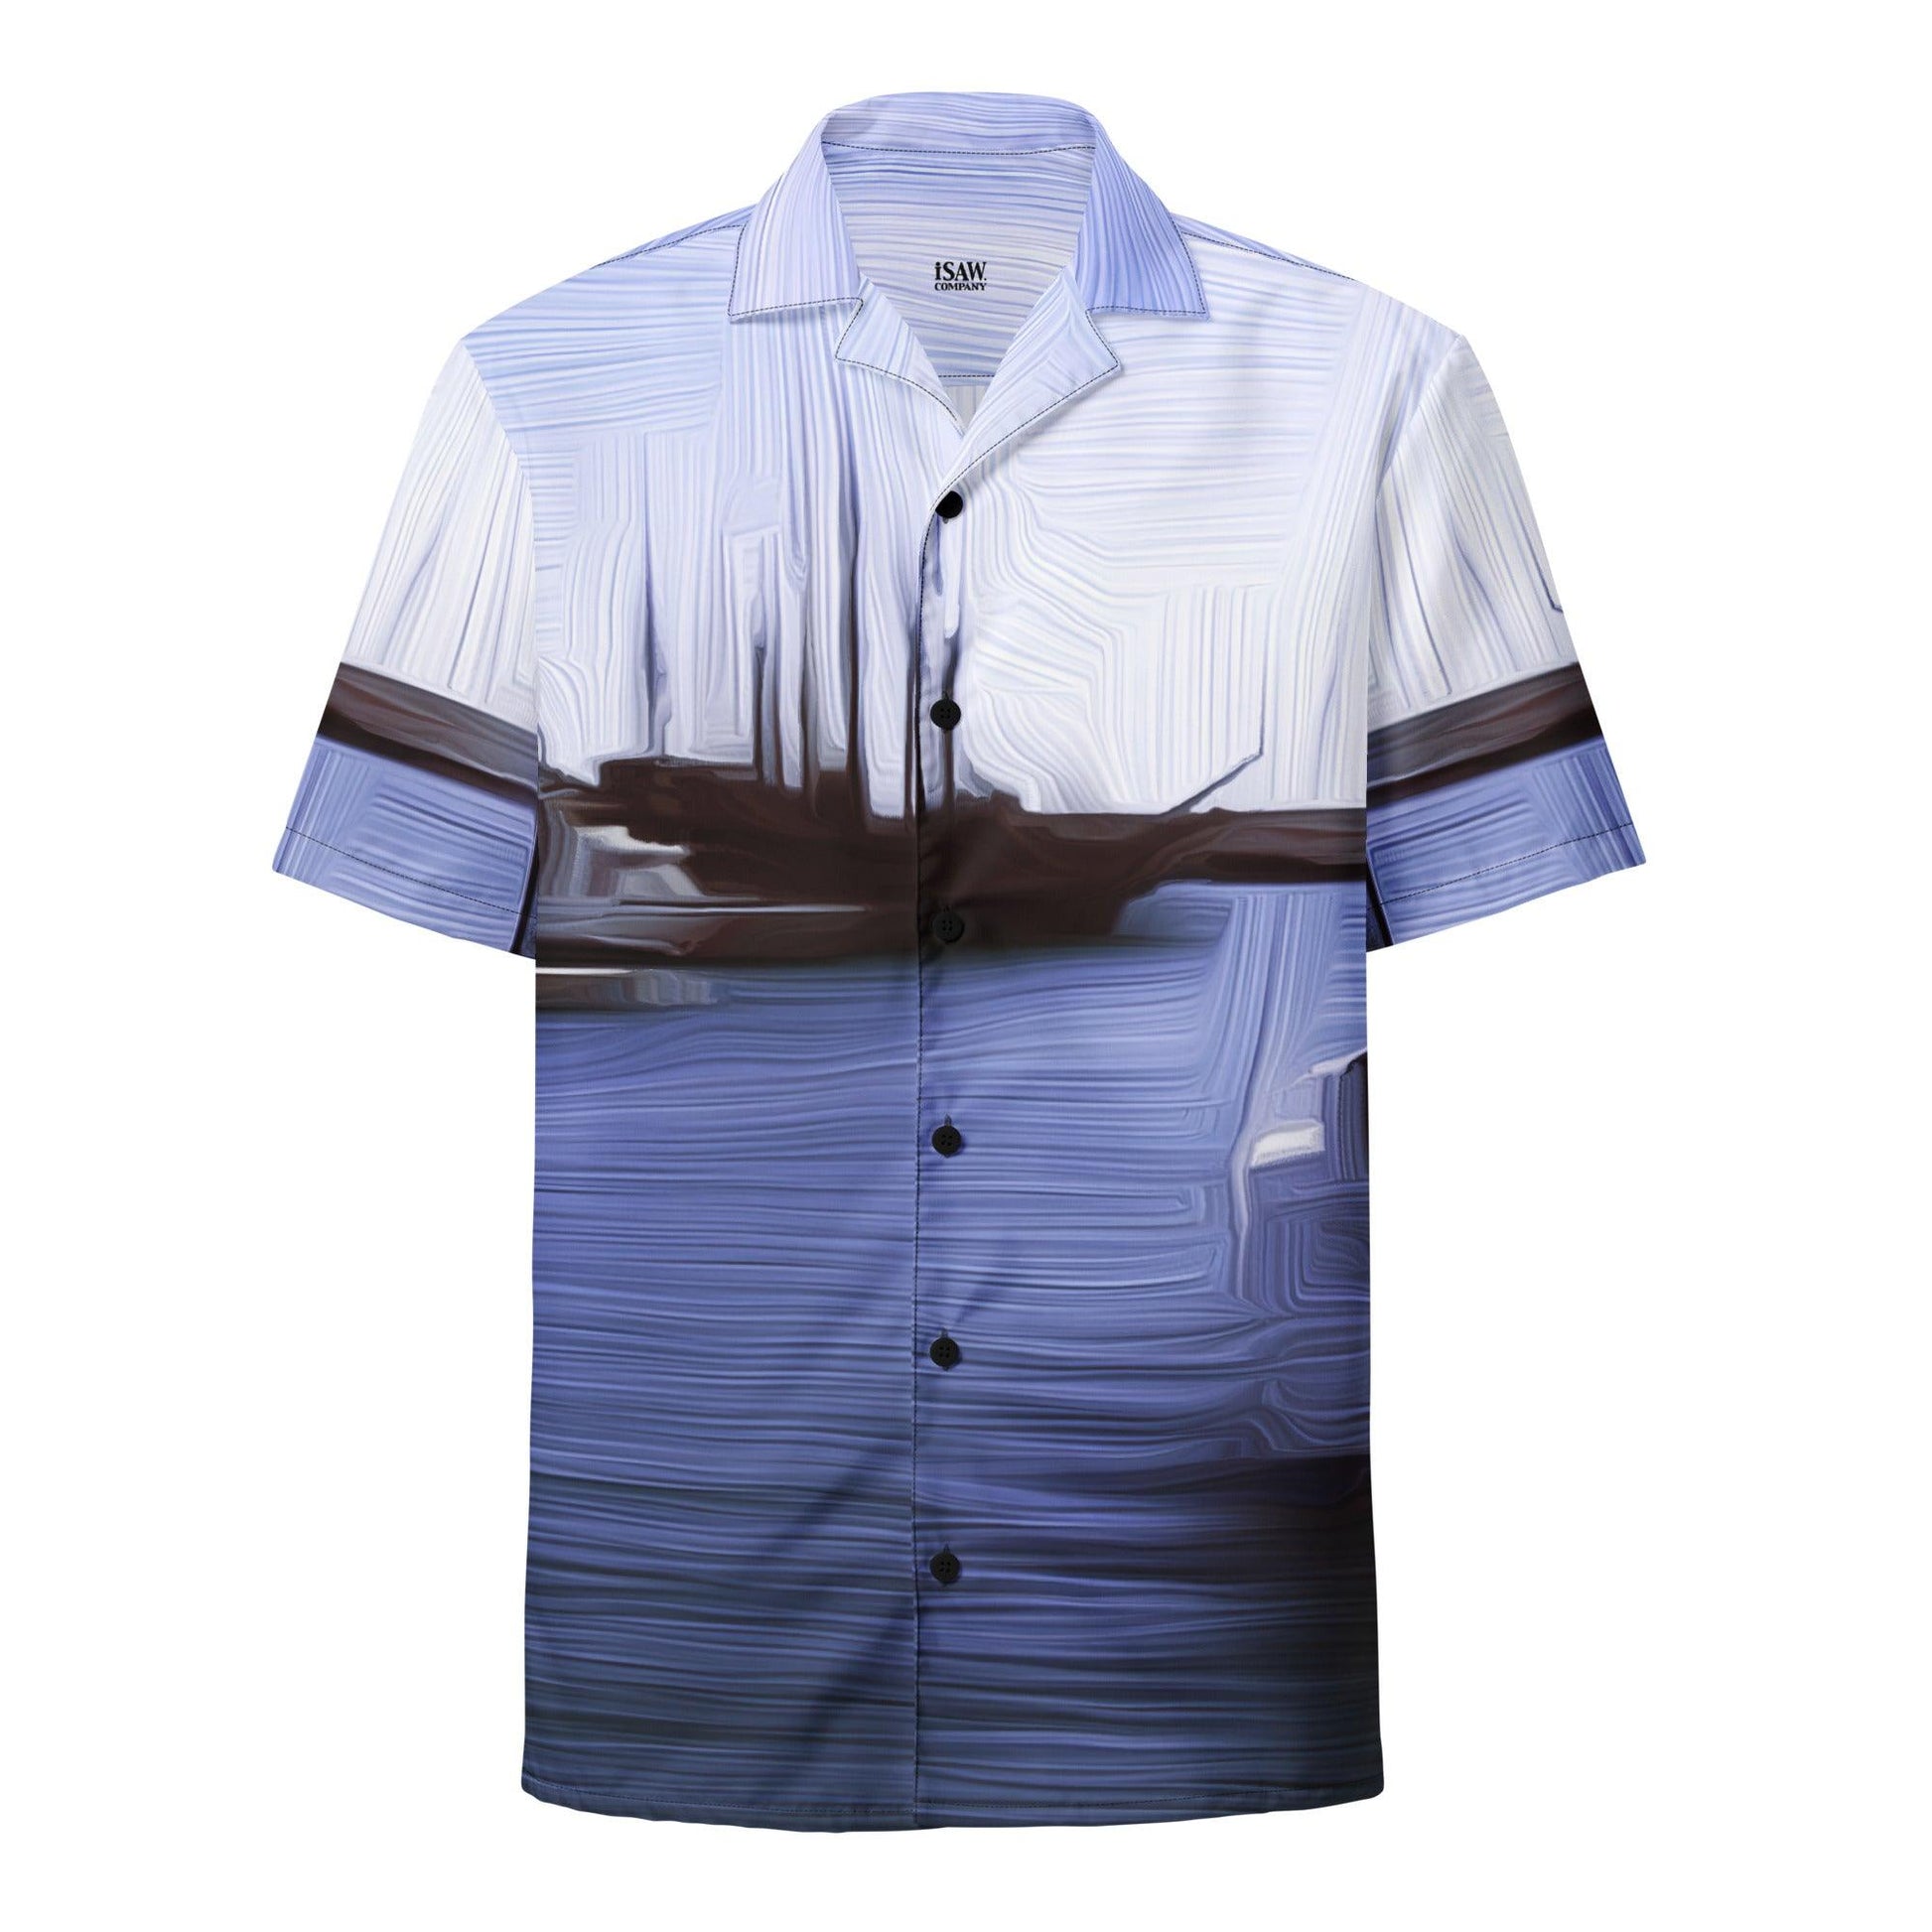 The Sleeping Yachts (at Afternoon) - Unisex Button Shirt - iSAW Company